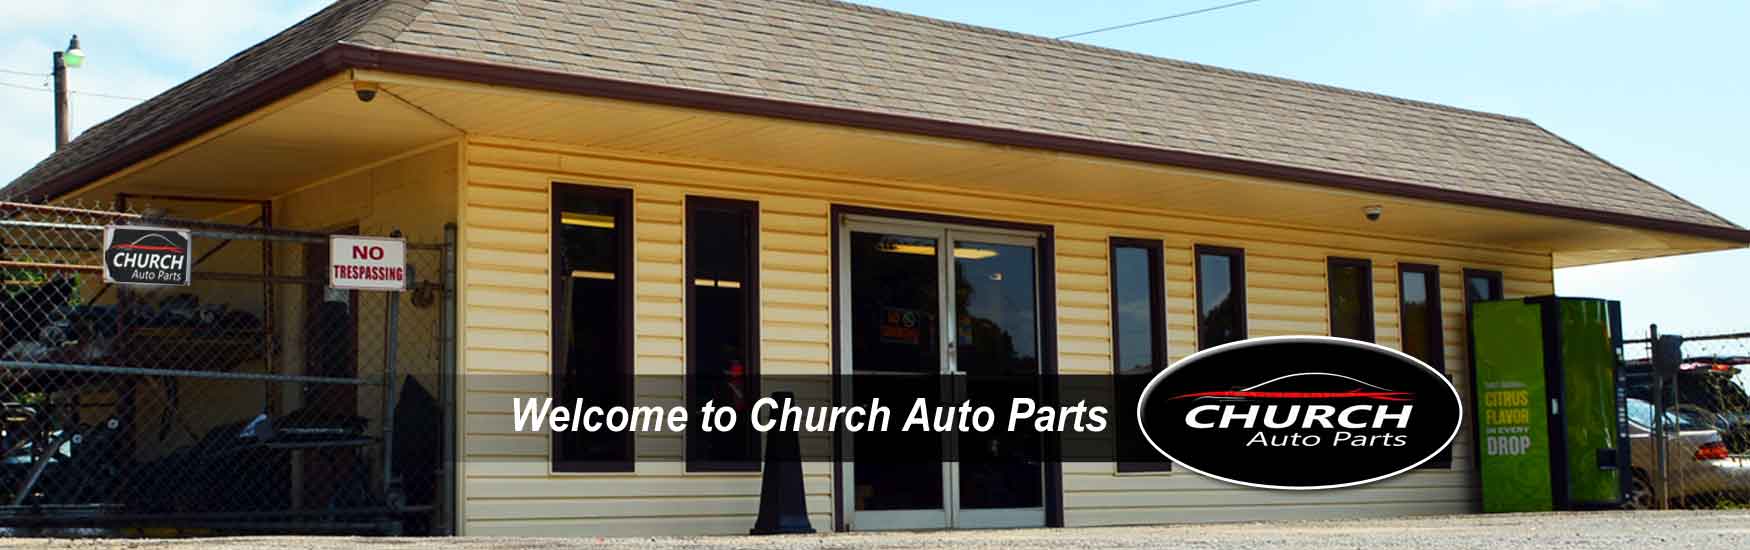 Church  Used Auto Parts Shelby Charlotte NC area